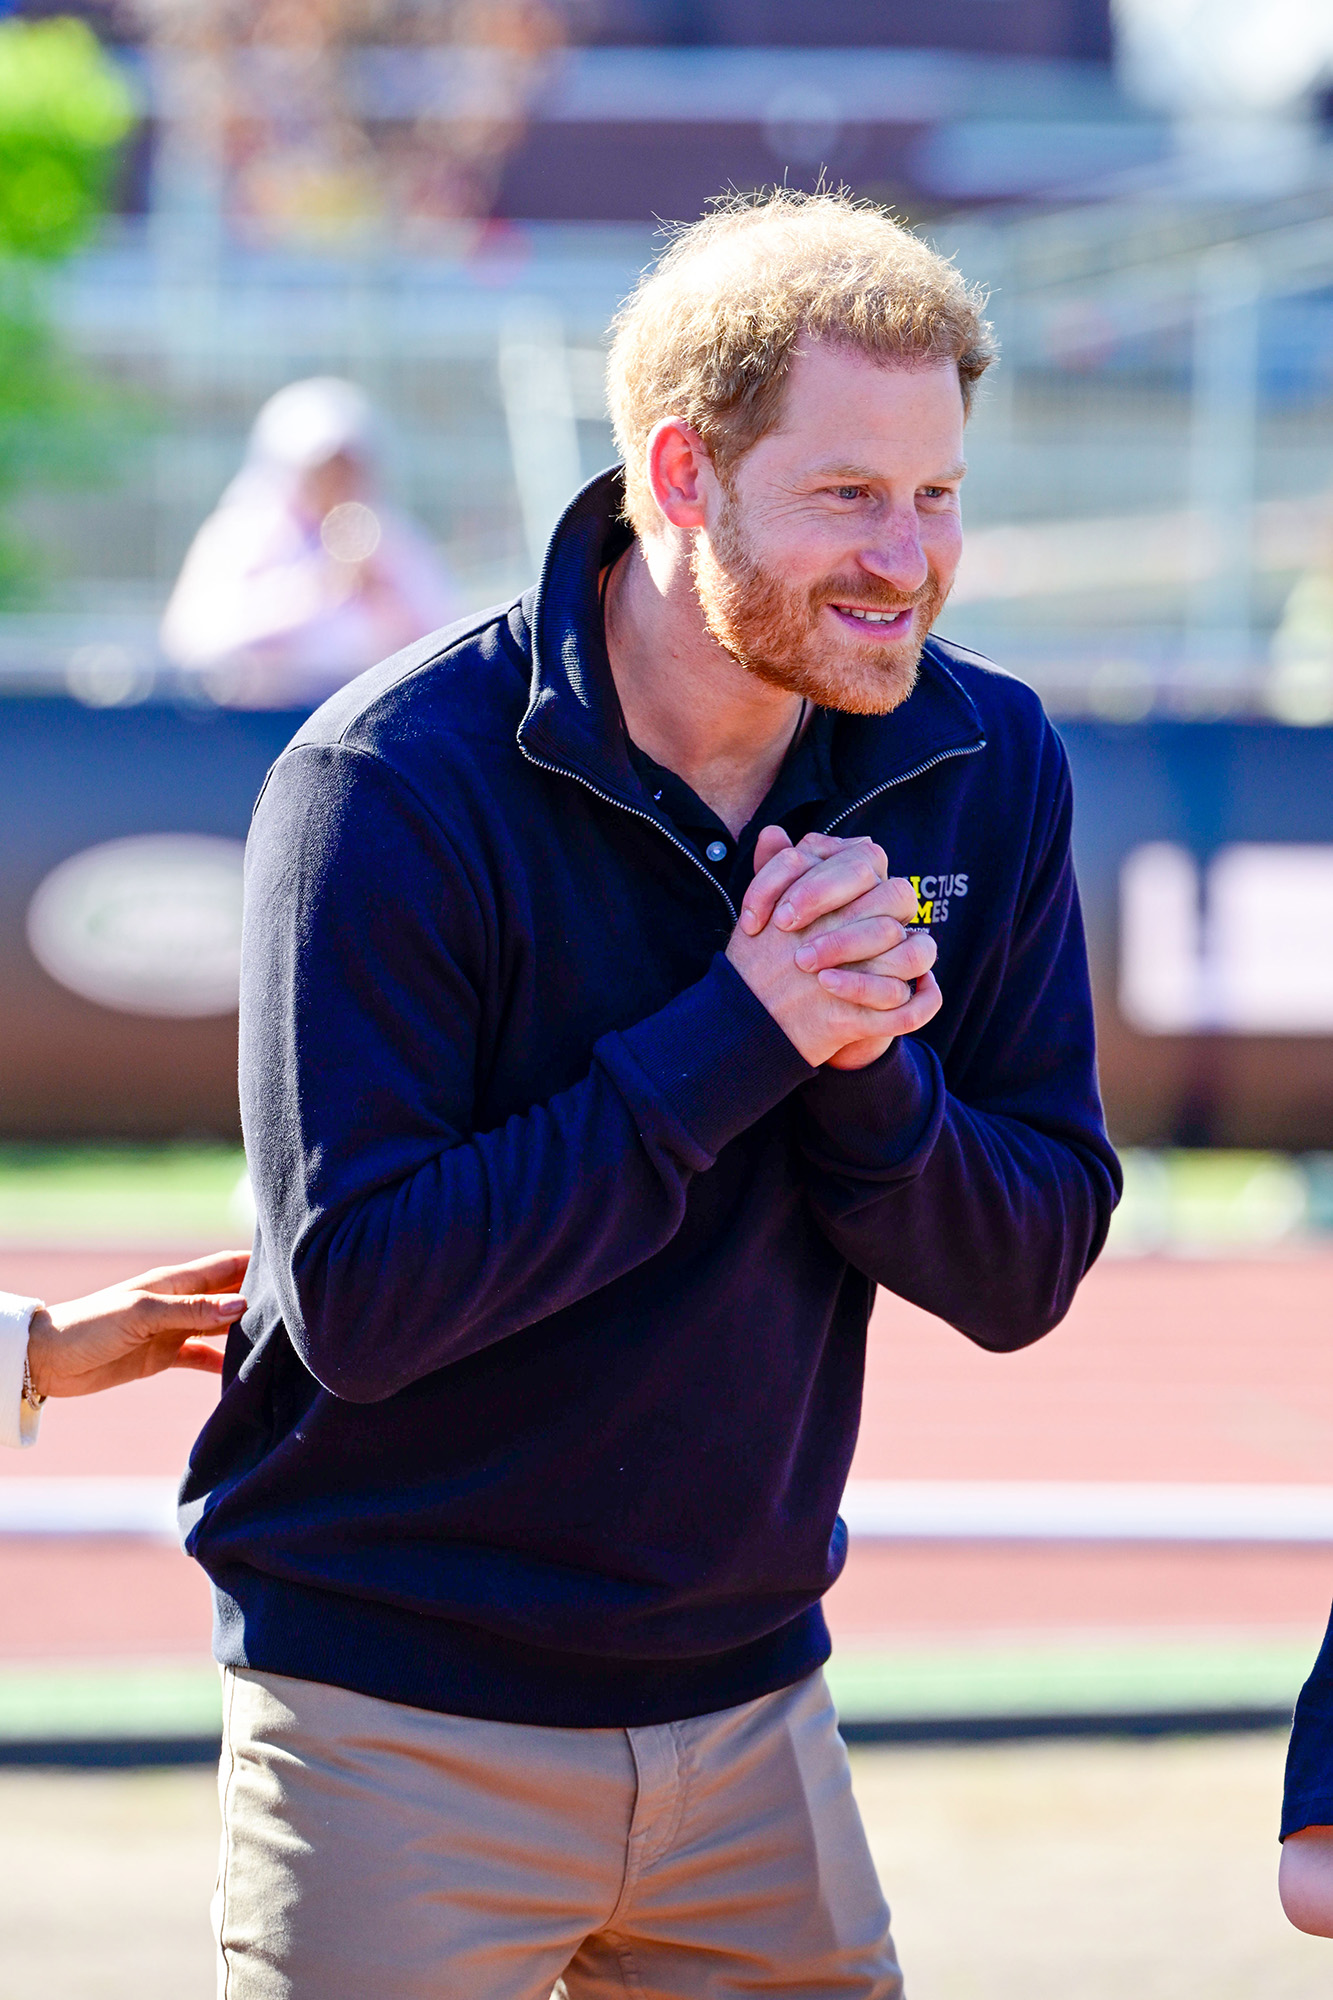 Prince Harry at Invictus Games 2022